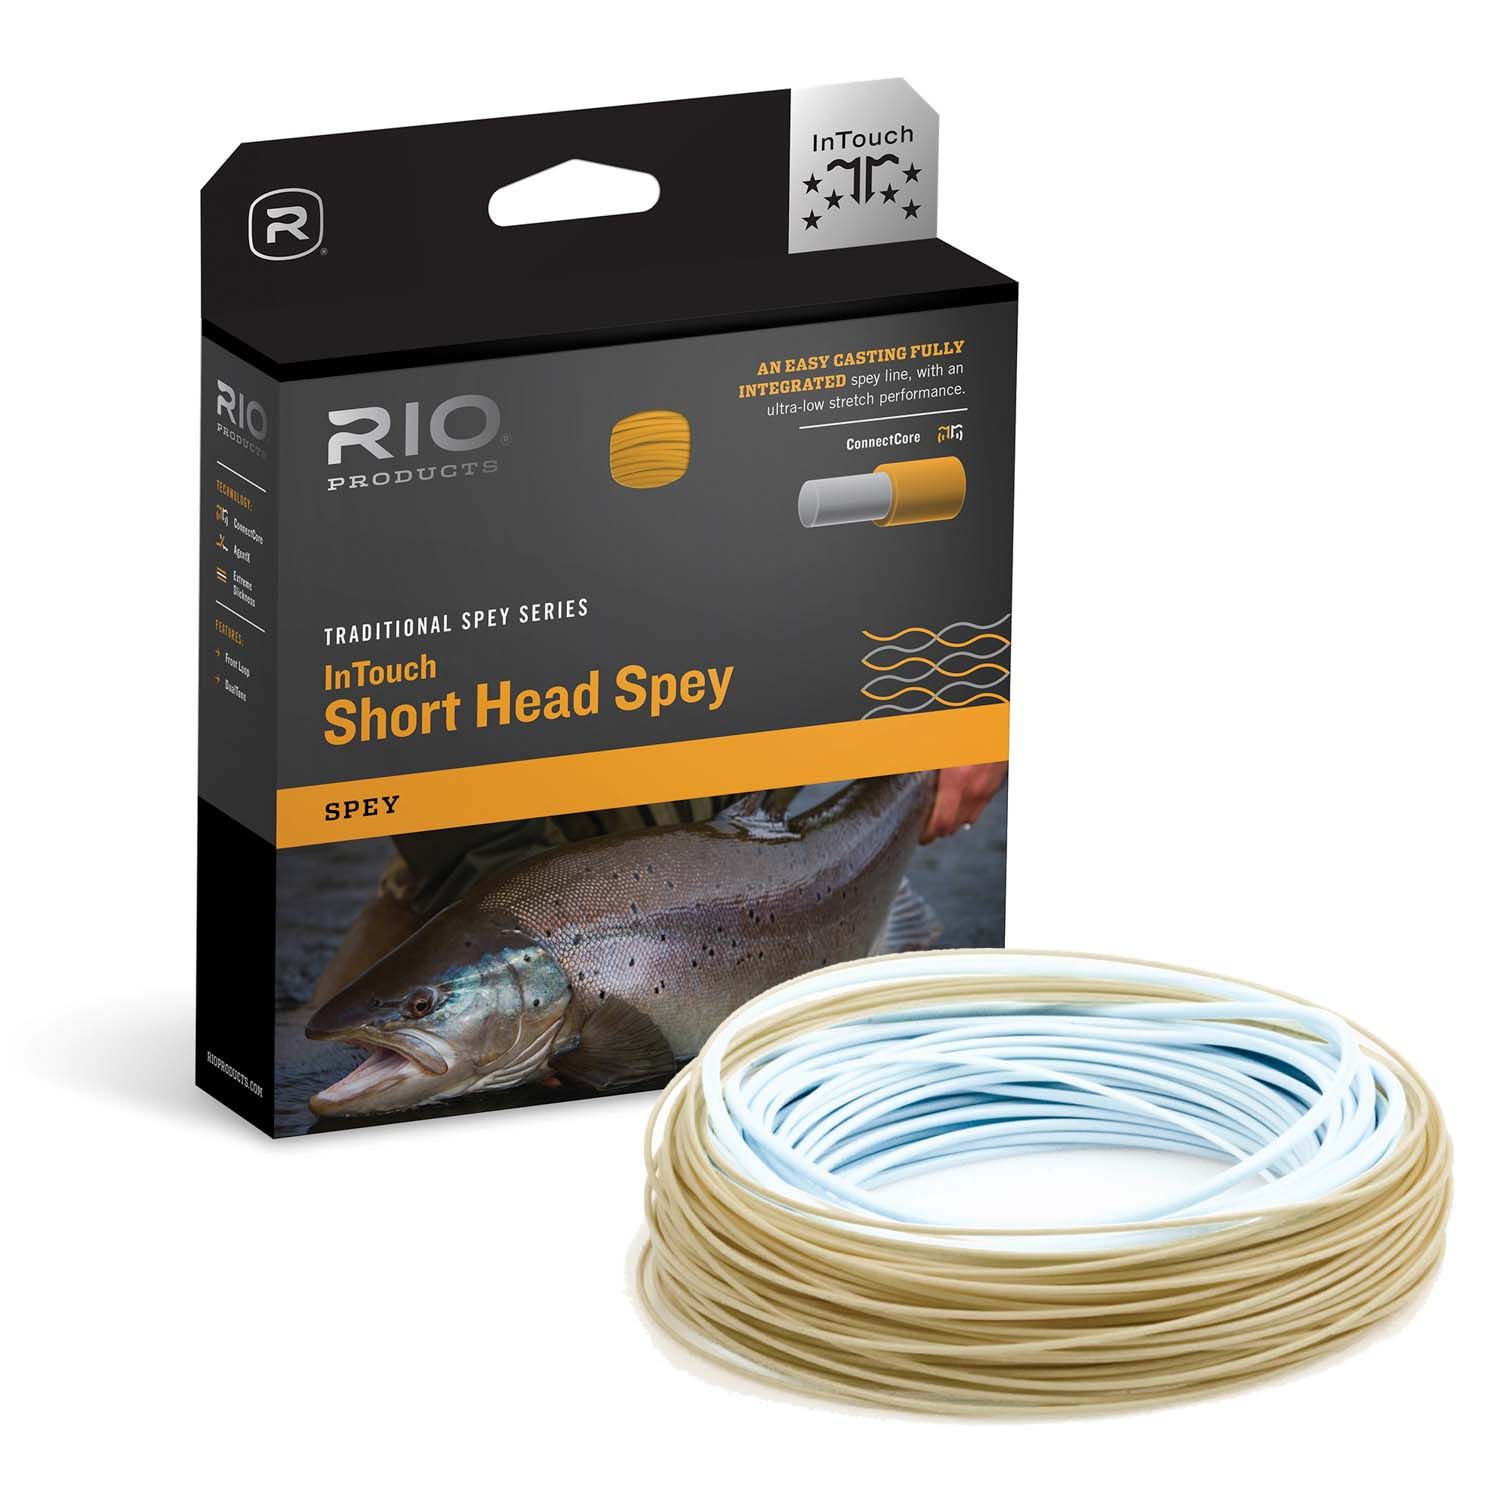 RIO InTouch Short Head Spey - Fin & Game